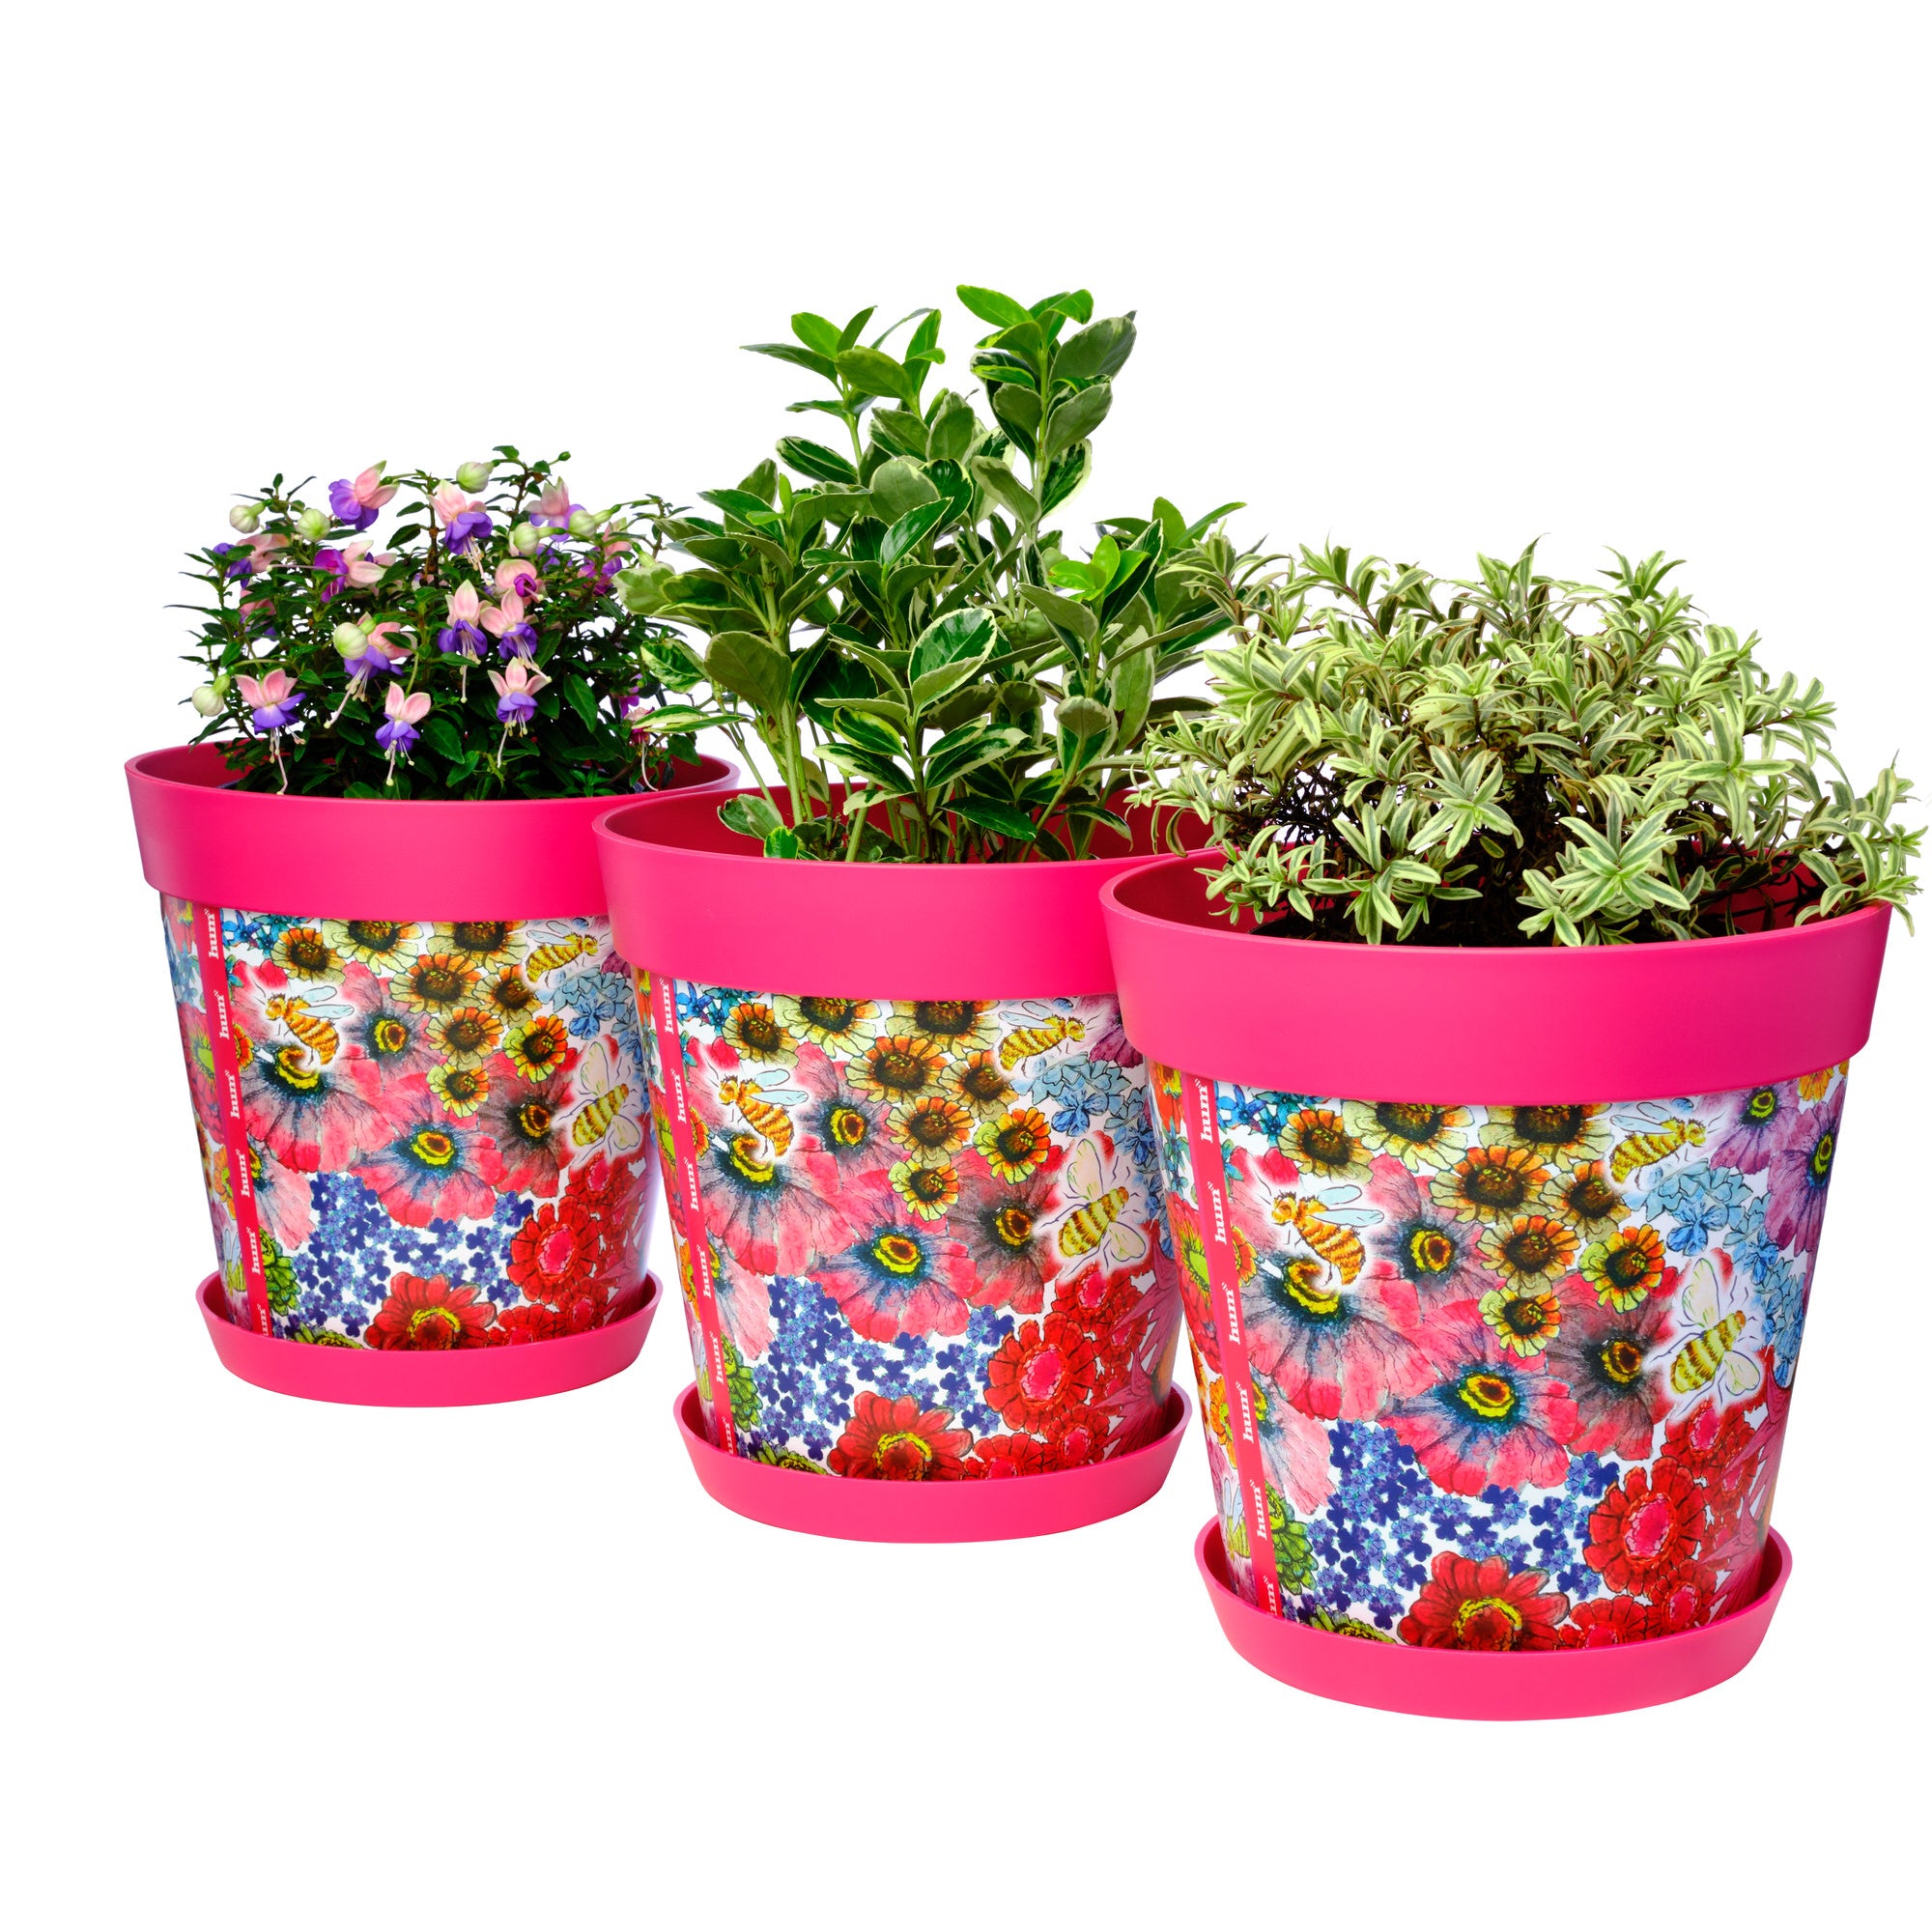 Picture of 3 Large 25cm Plastic Pink Flowers and Bees Pattern Indoor/Outdoor Flowerpots with Saucers 